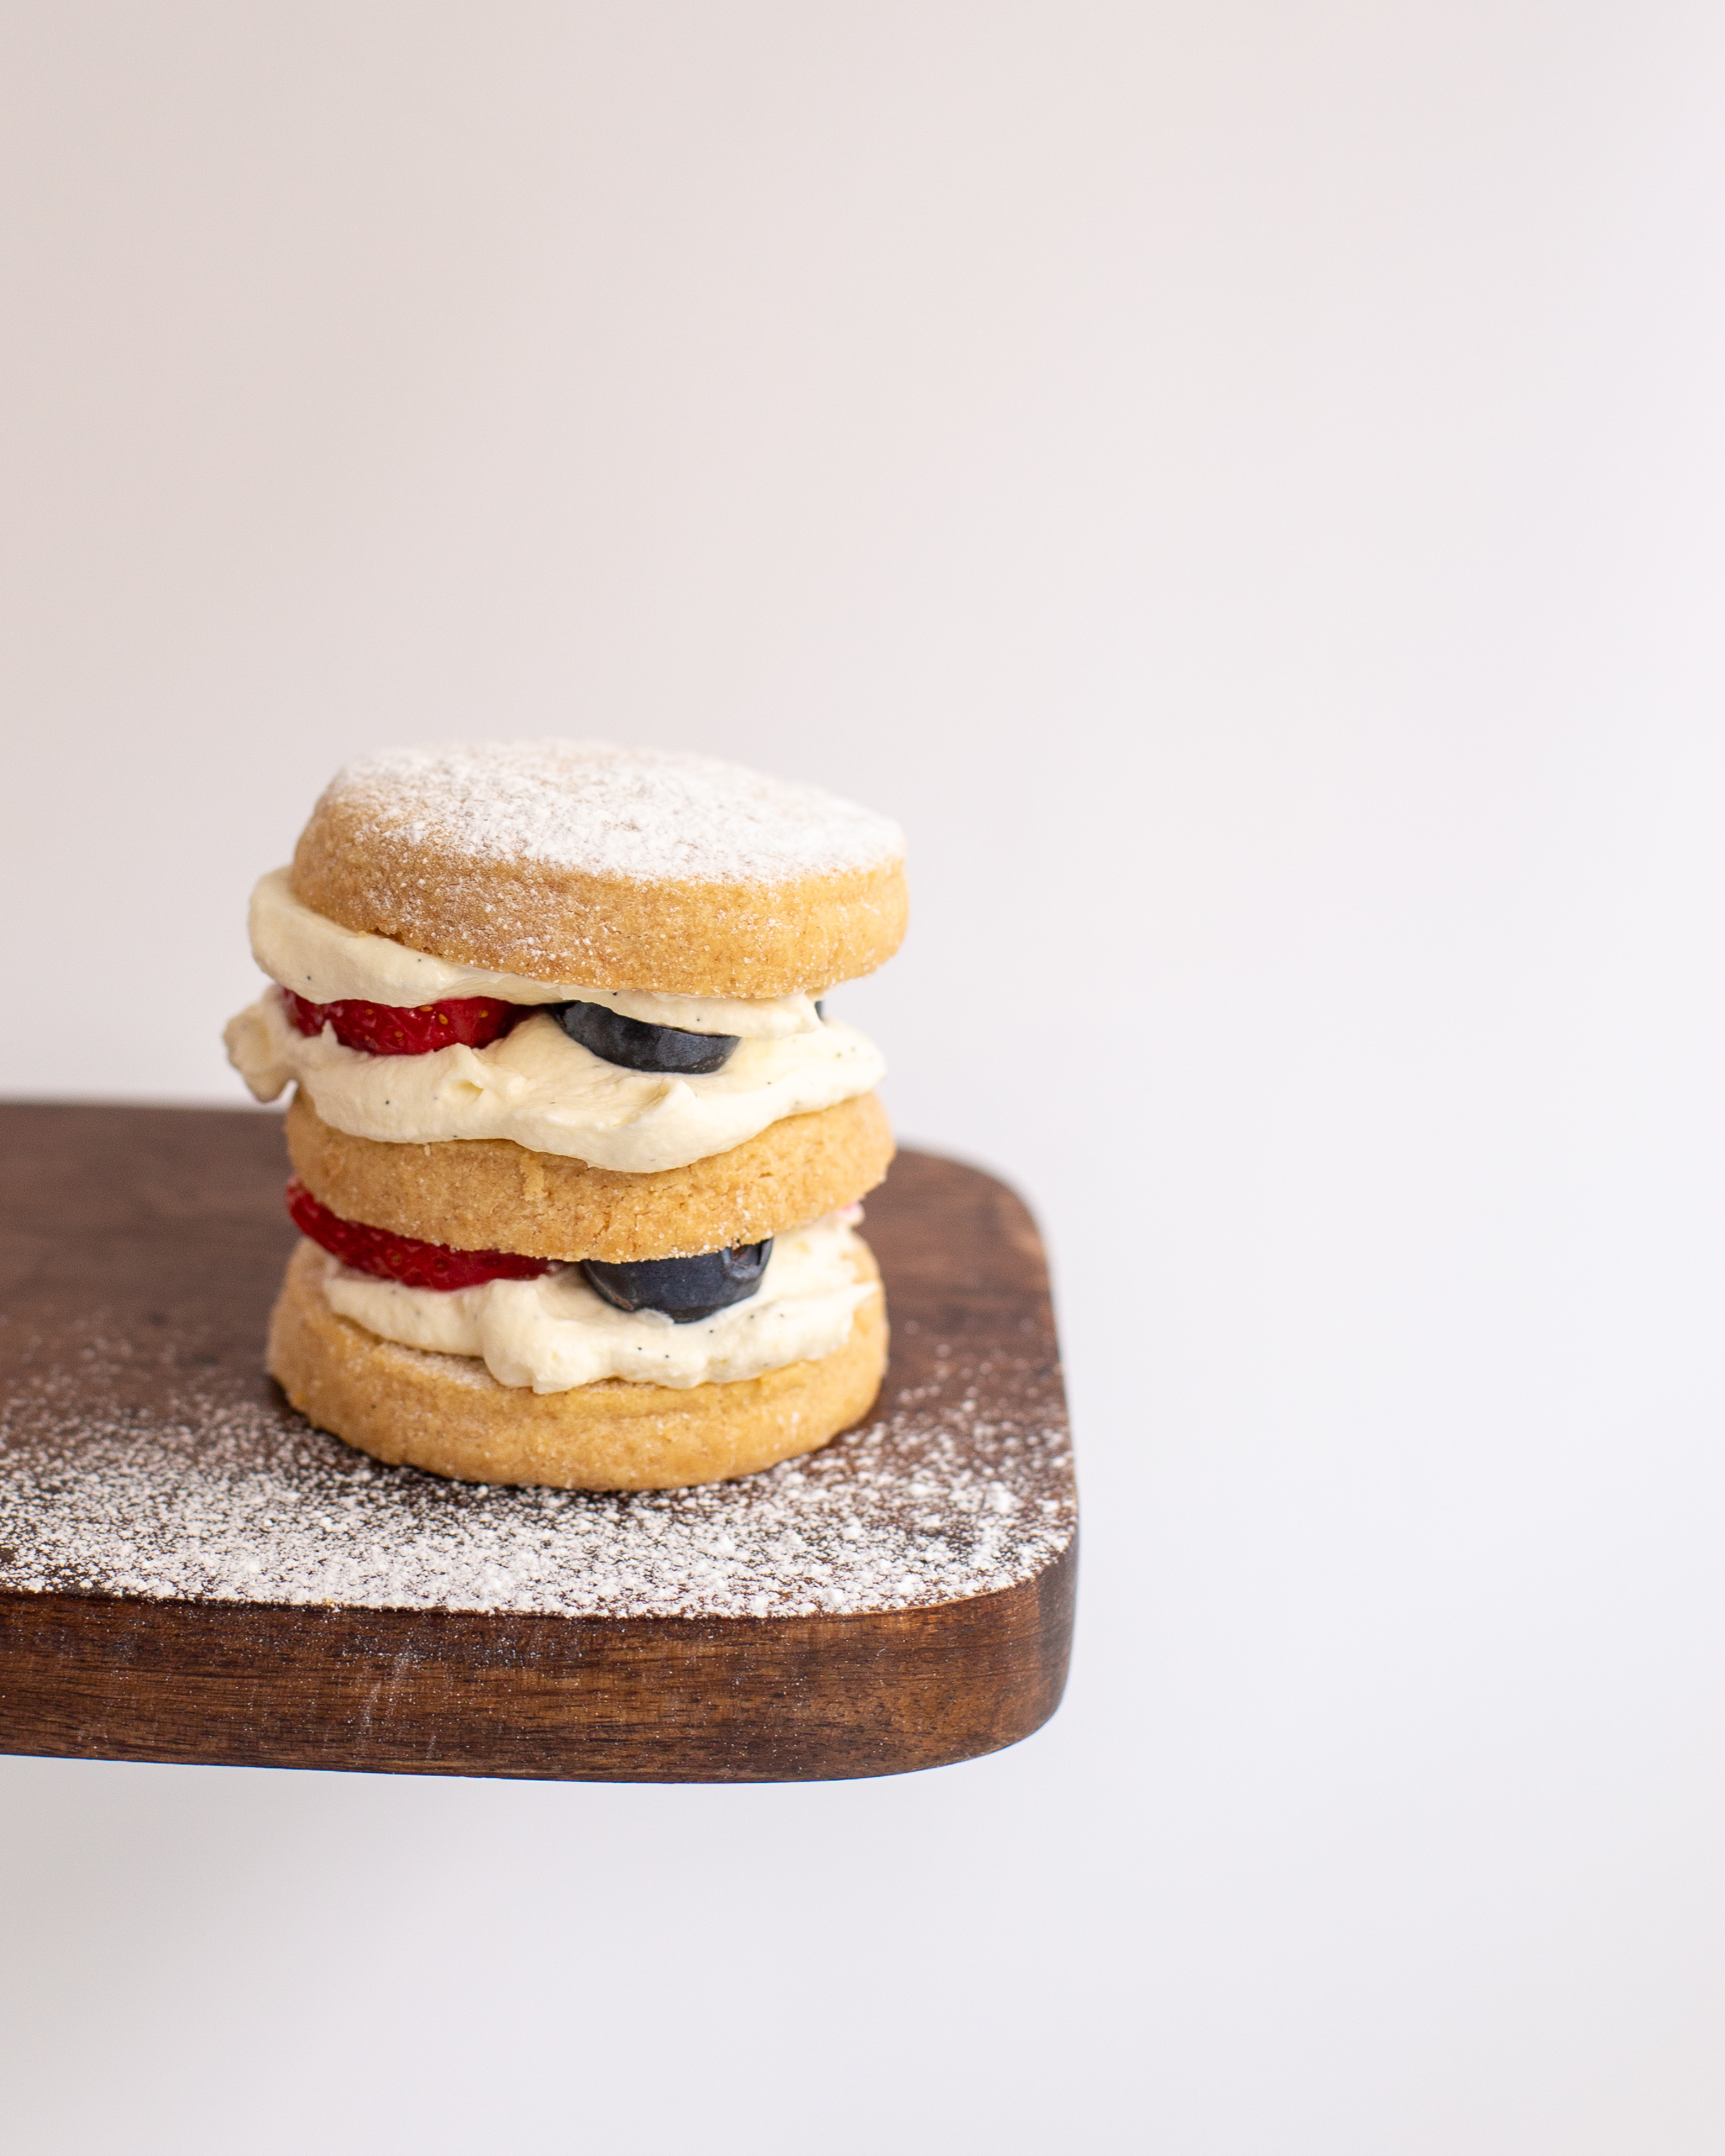 Lightly dust some icing sugar over the tops of your stacks and serve!